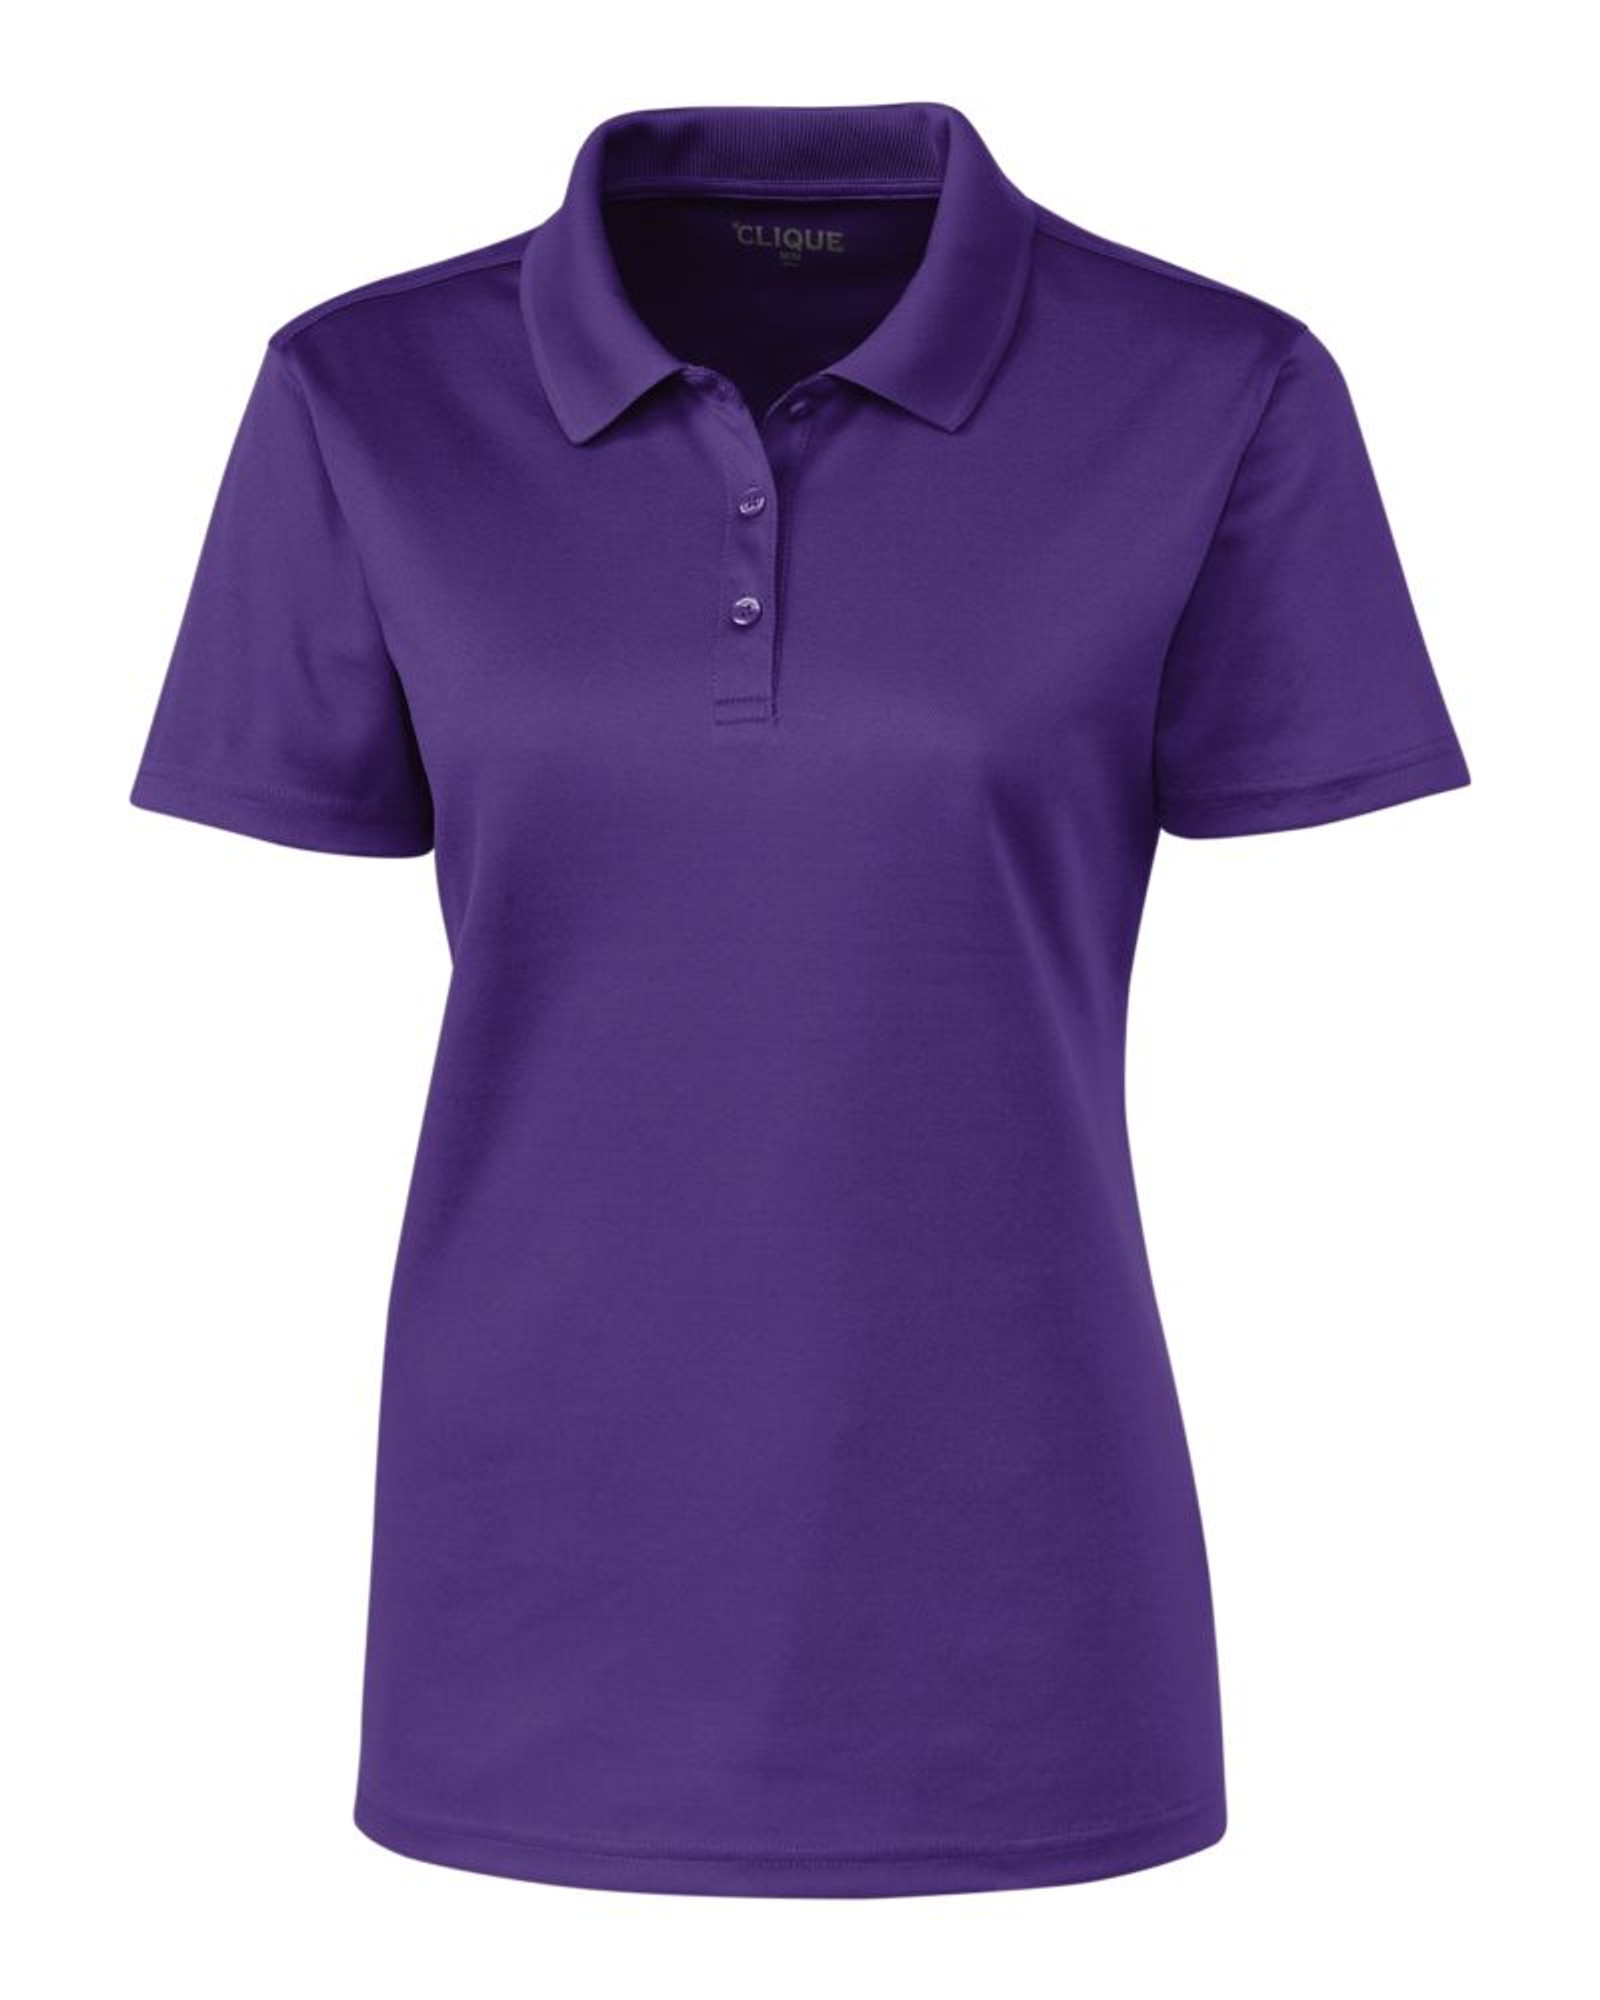 Clique Spin Eco Performance Pique Womens Polo | Cutter and Buck Canada